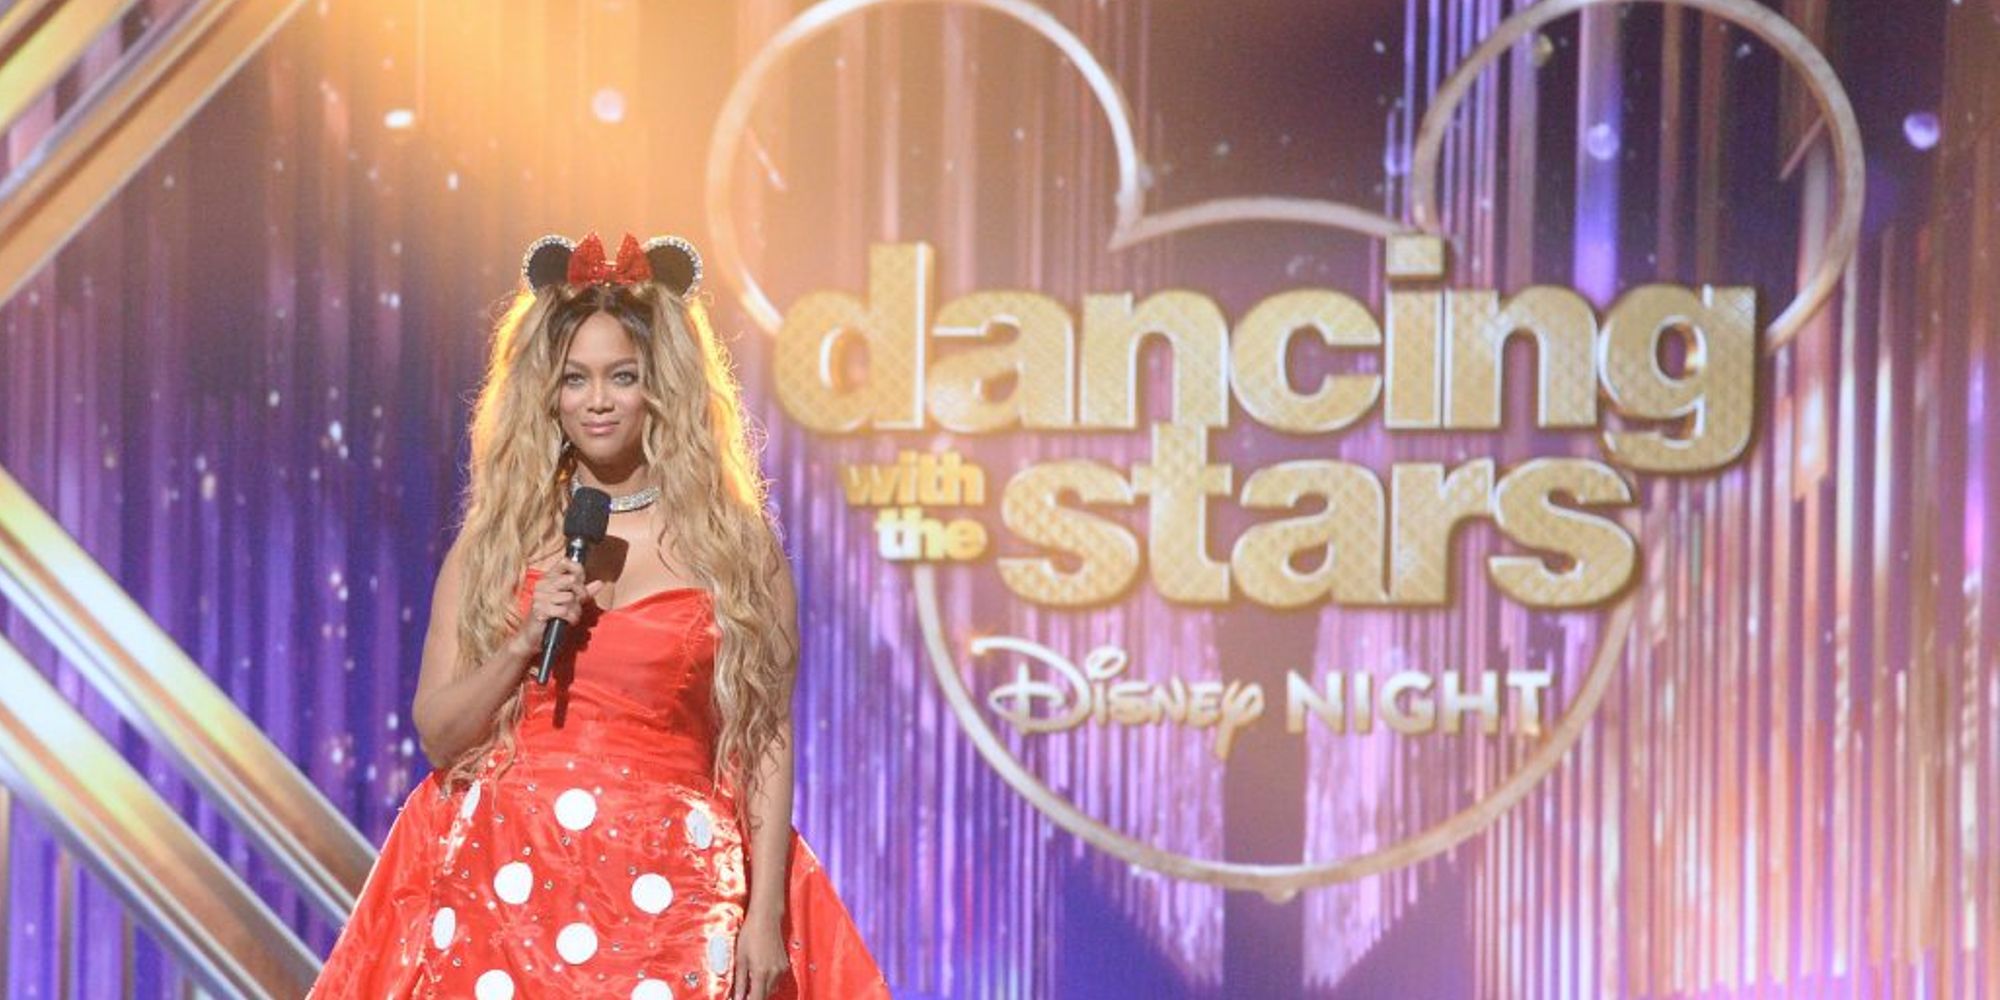 Tyra Banks on Dancing With The Stars episode for Disney Night